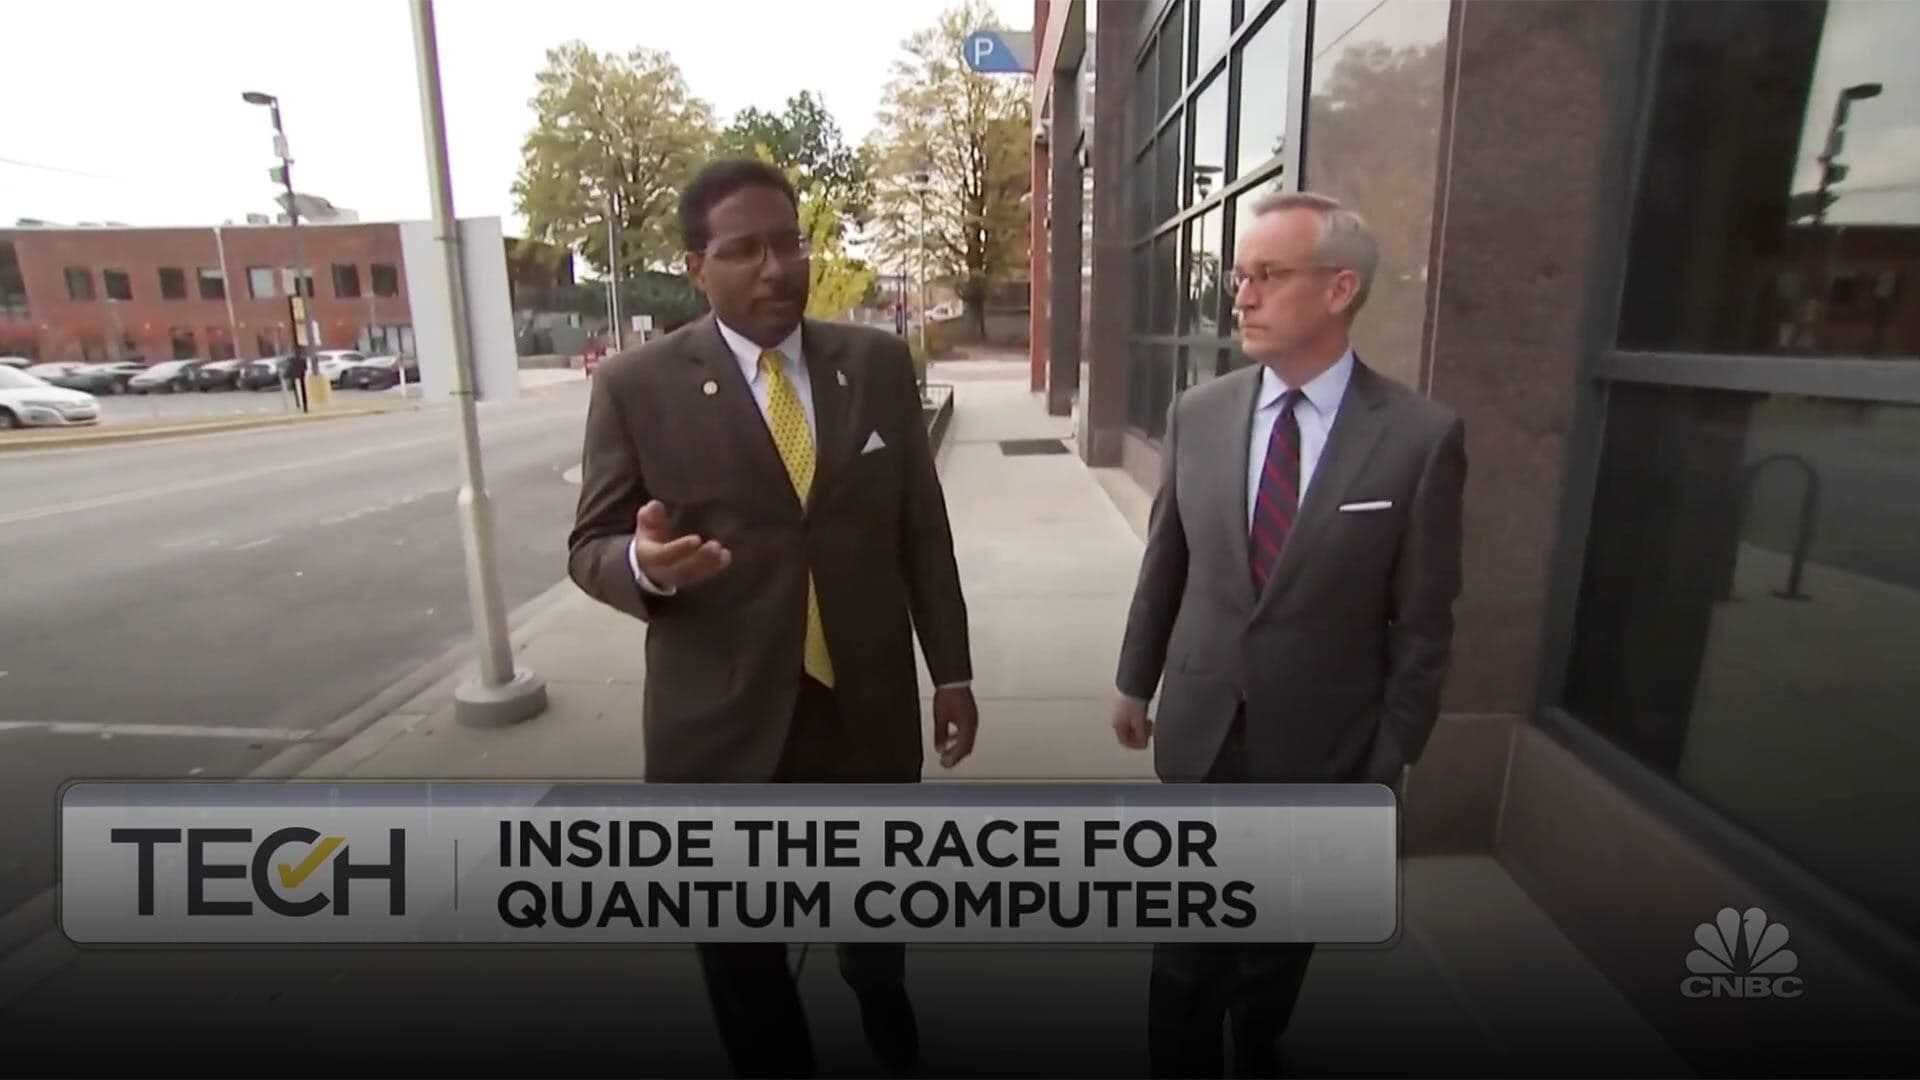 Screengrab of Pines on CNBC with caption: "Inside the Race for Quantum Computers"